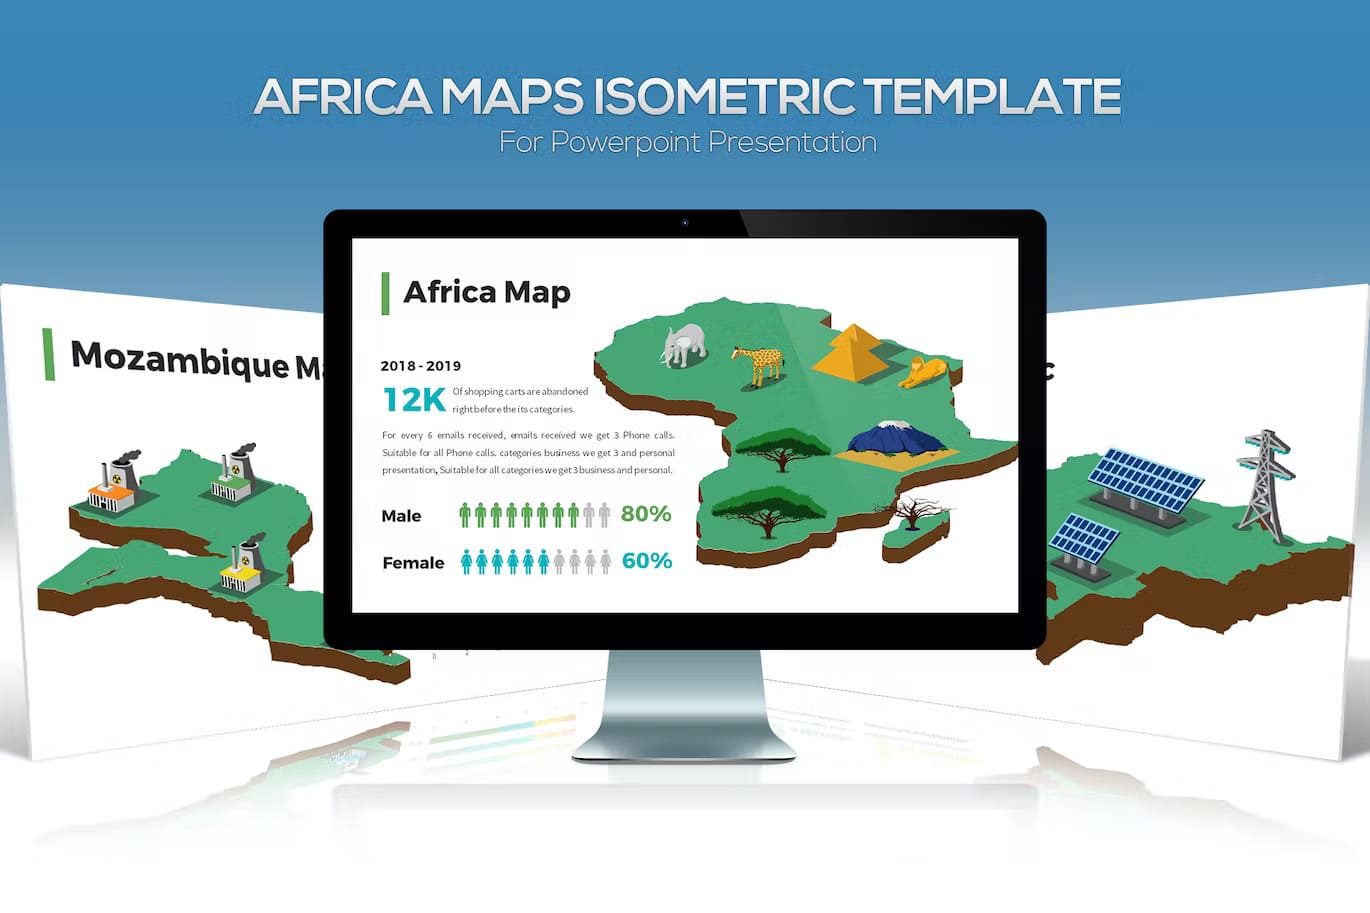 Preview Africa maps isometric template on the computer.